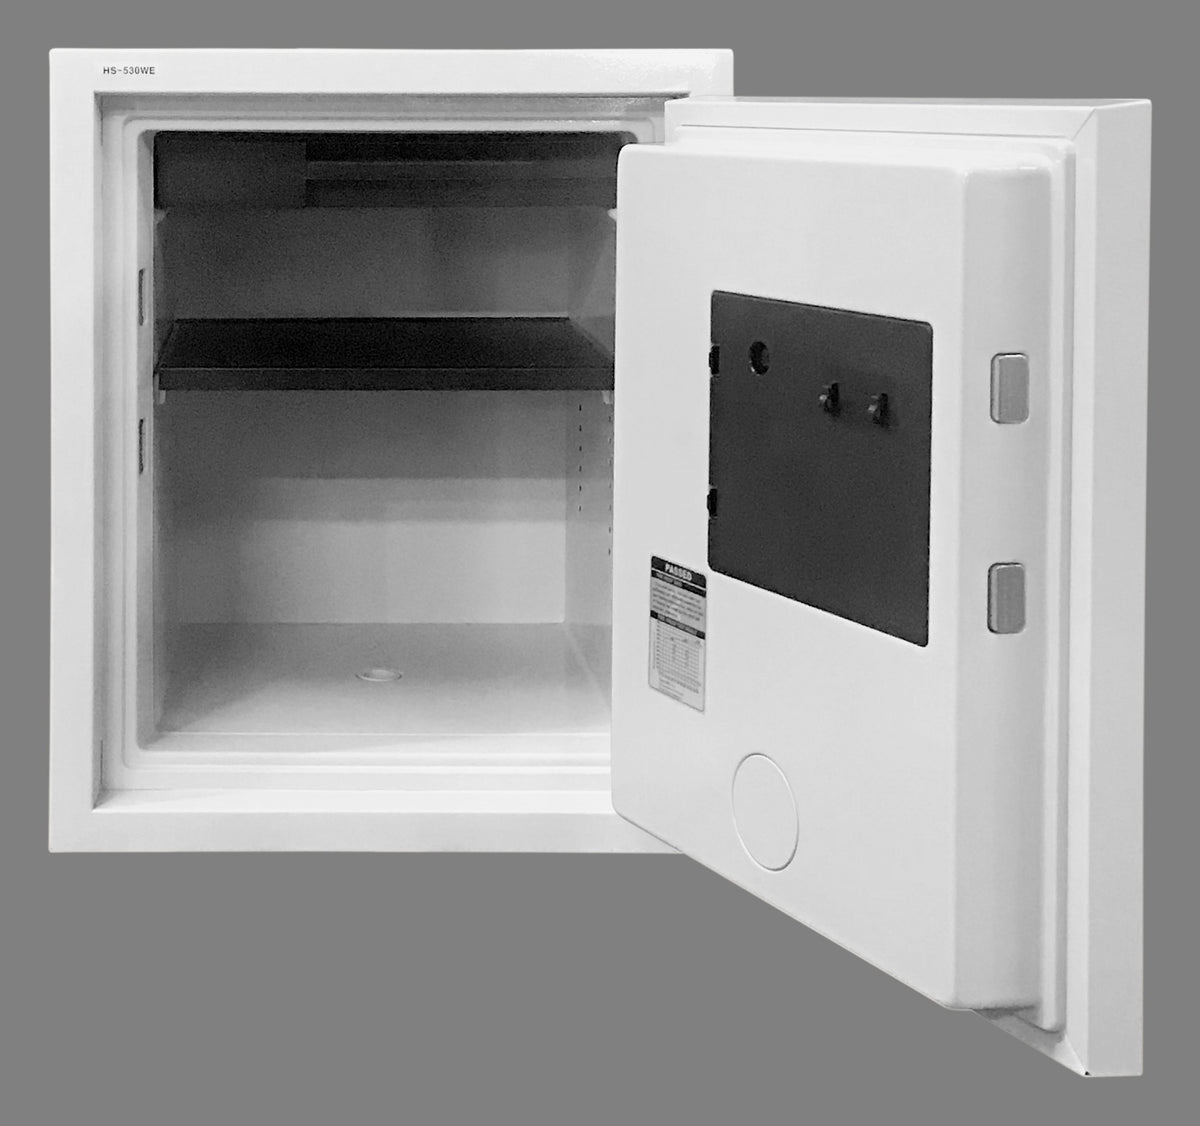 Fireproof Safes &amp; Waterproof Chests - Hollon HS-530WD 2 Hour Home Safe With Mechanical Lock